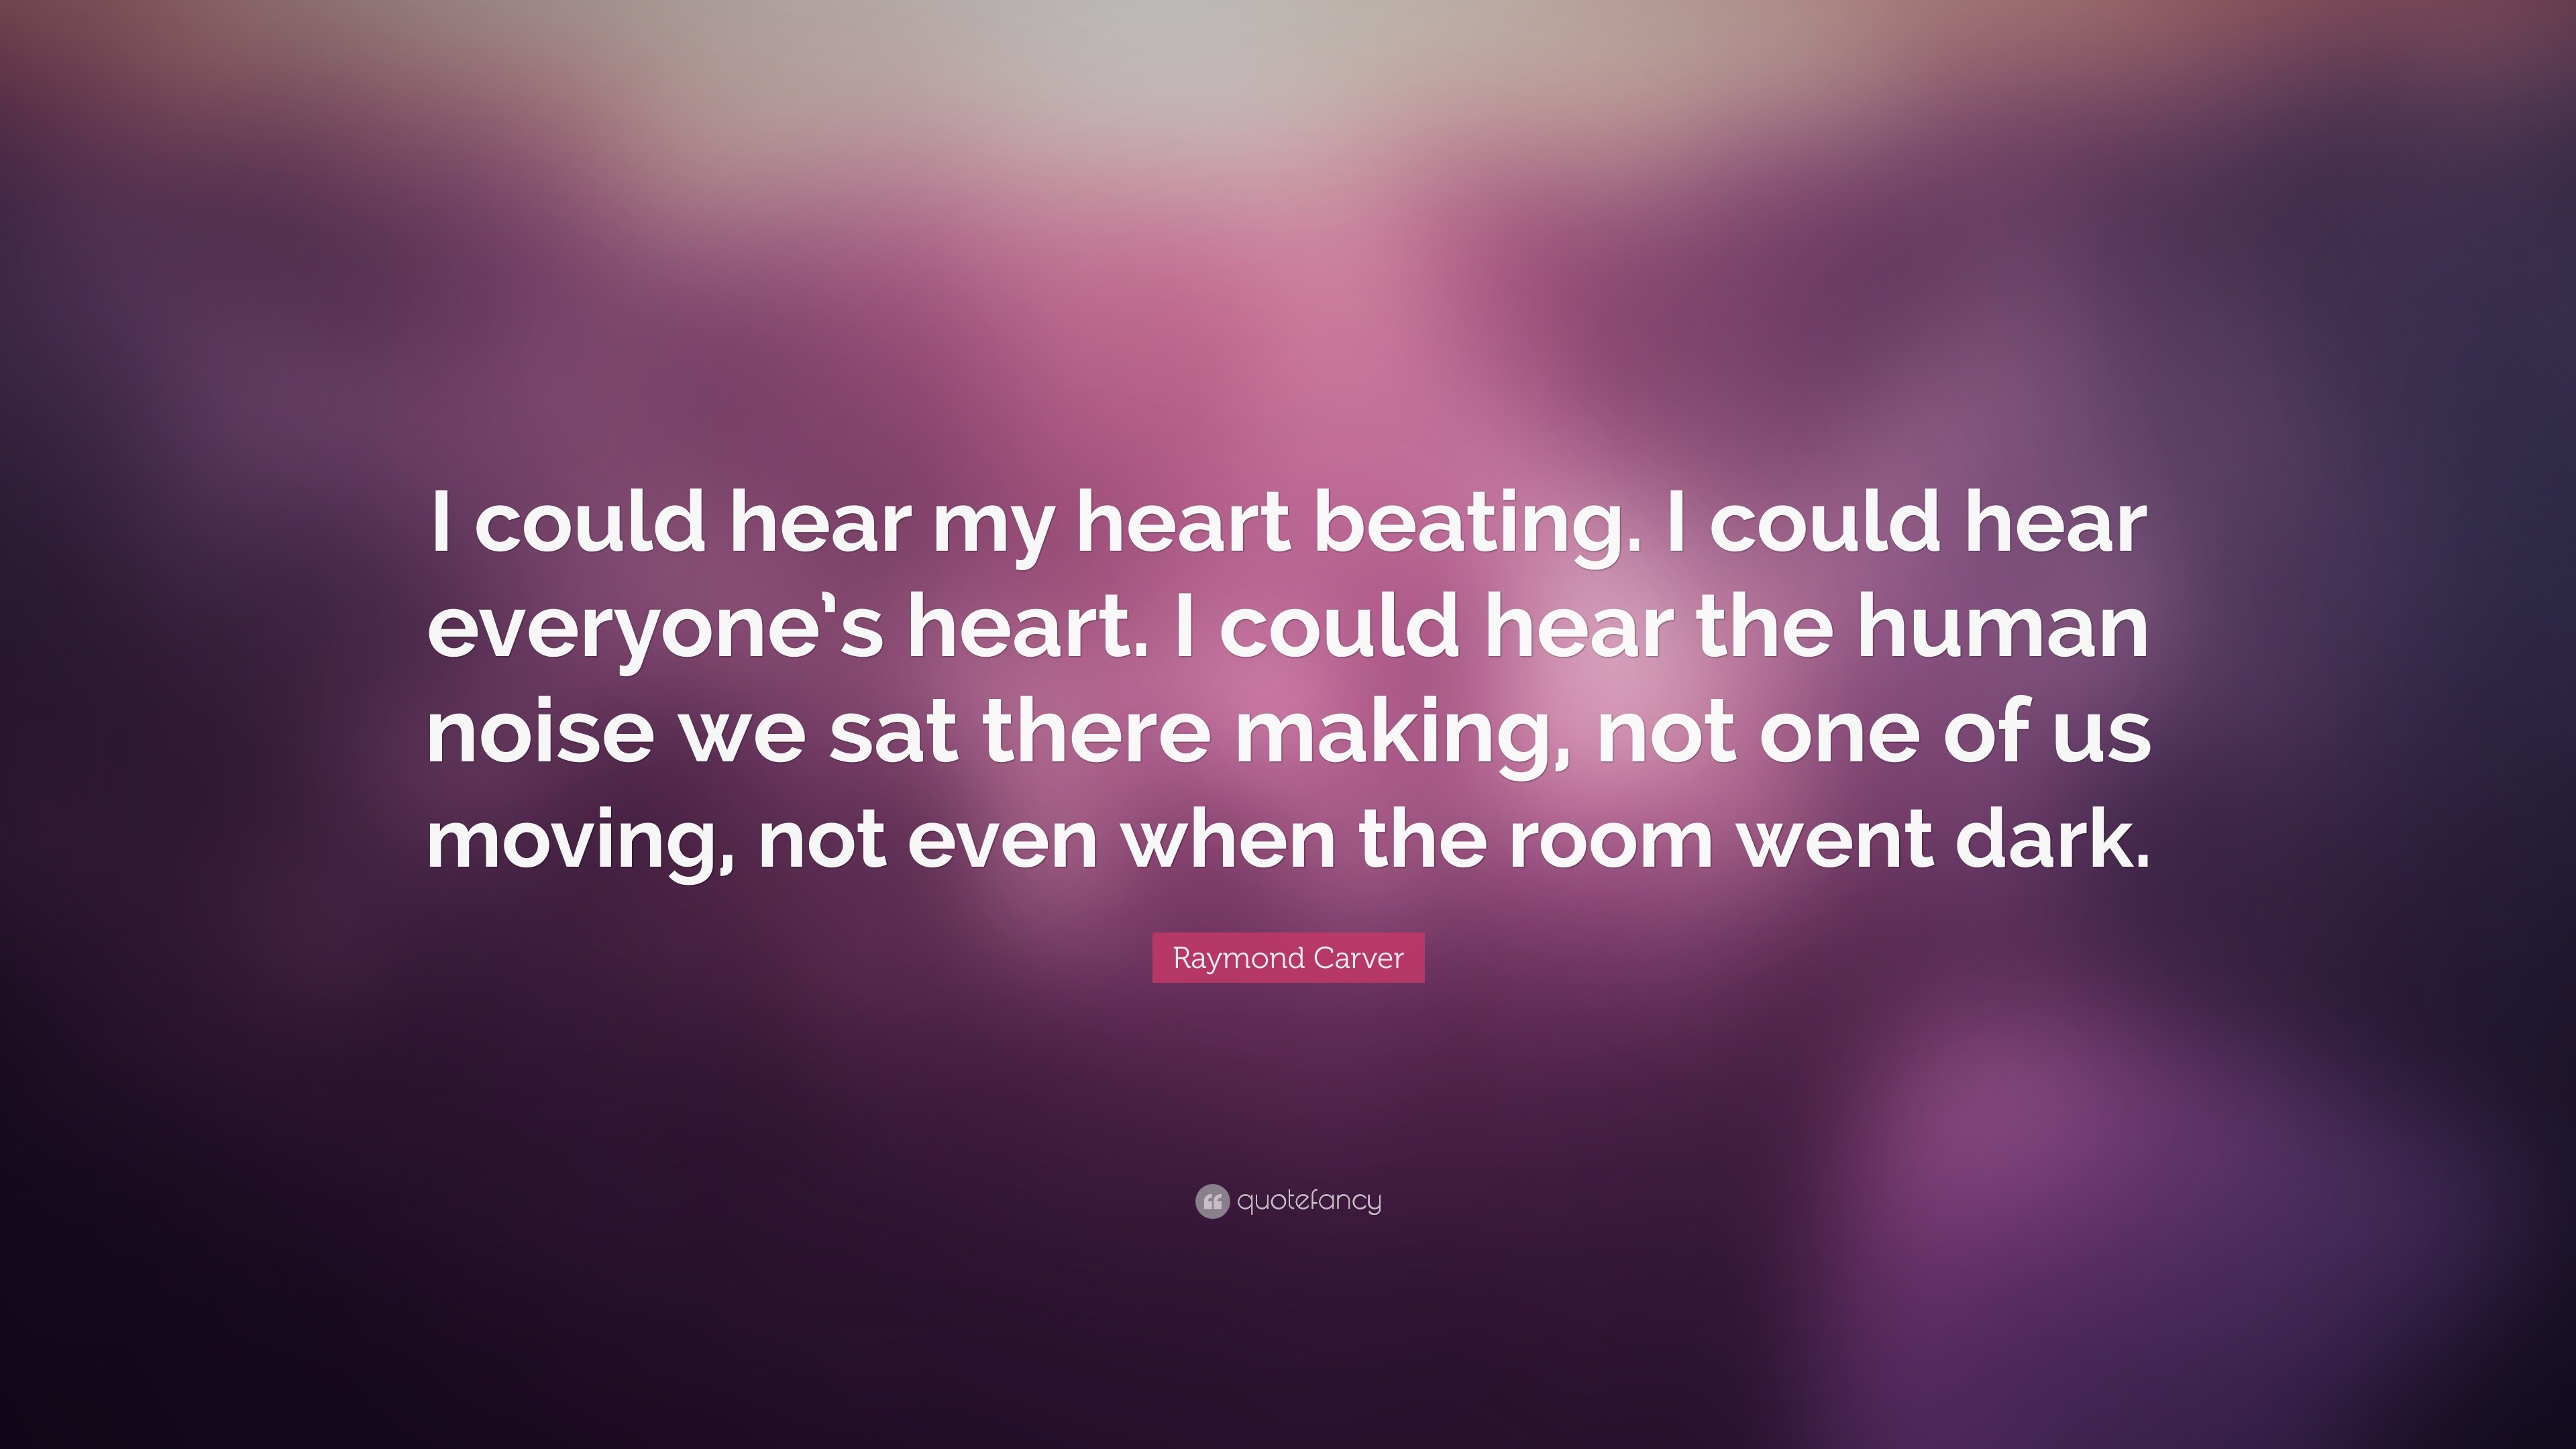 Raymond Carver Quote I Could Hear My Heart Beating I Could Hear Everyone S Heart I Could Hear The Human Noise We Sat There Making Not One 11 Wallpapers Quotefancy